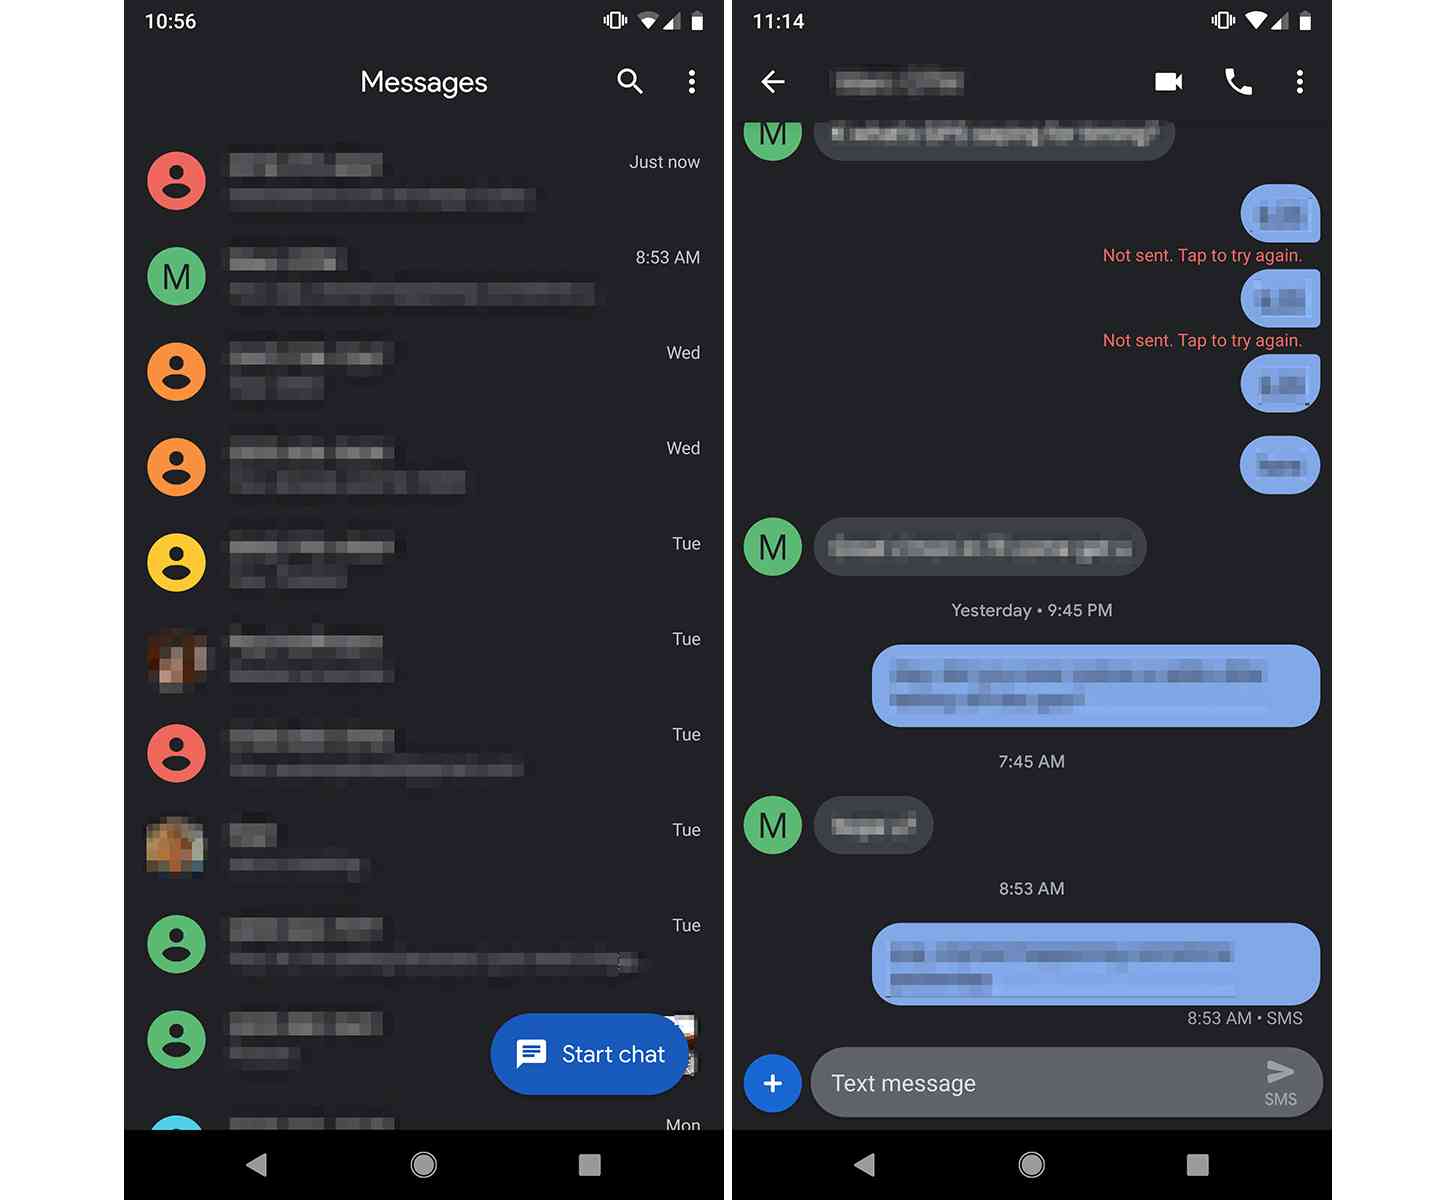 Android Messages 3.5 dark mode